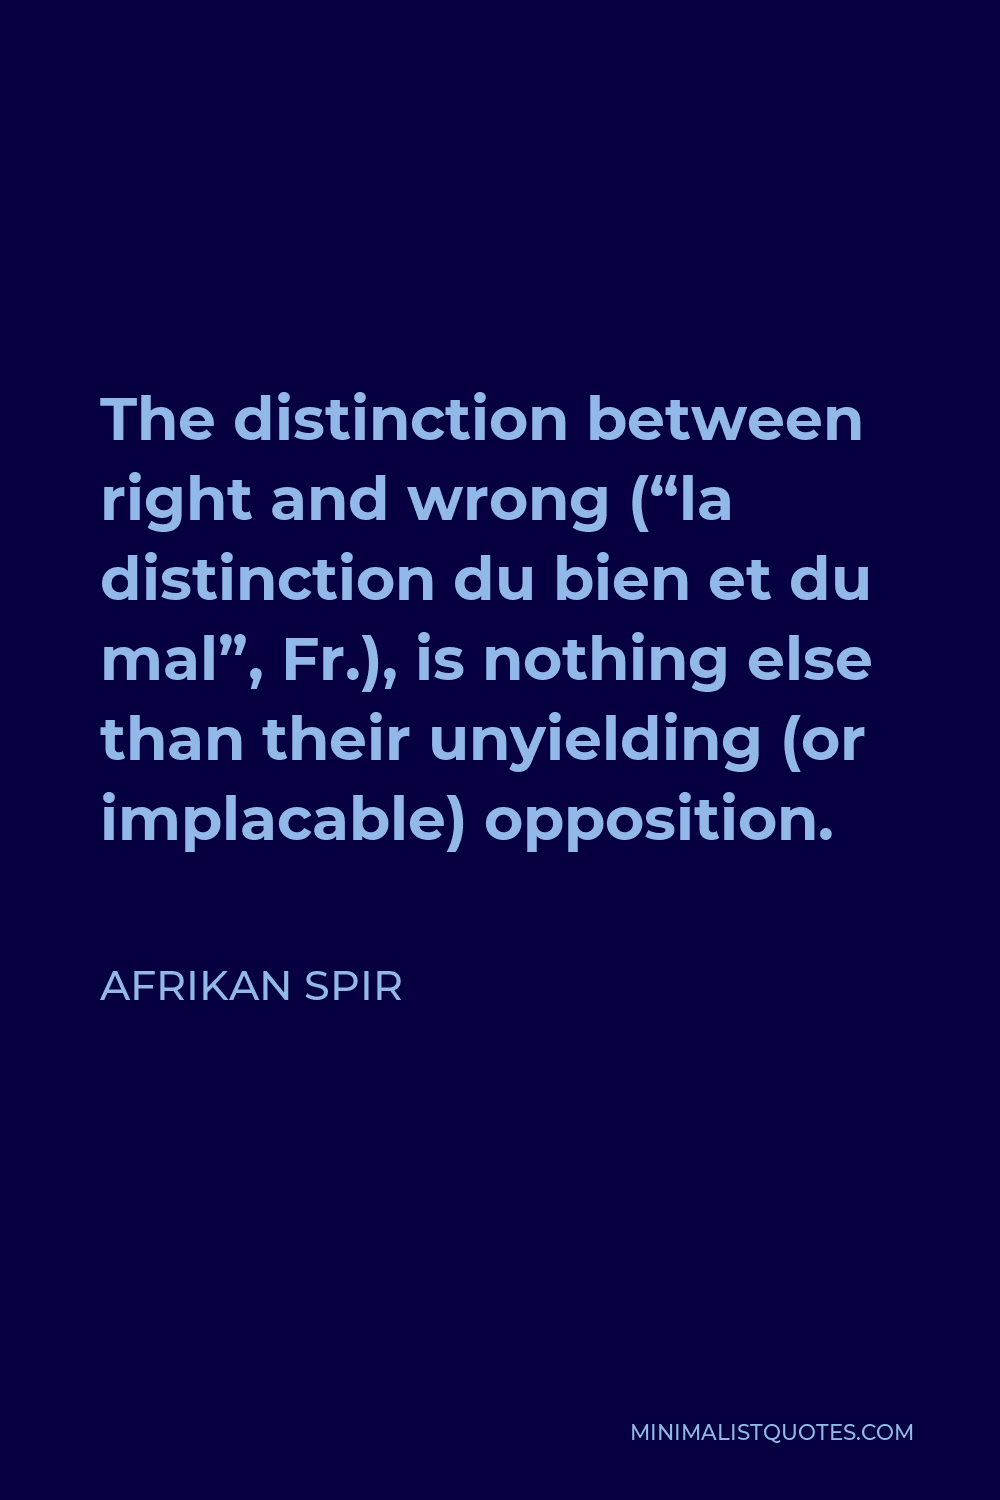 Afrikan Spir Quote - The distinction between right and wrong (“la distinction du bien et du mal”, Fr.), is nothing else than their unyielding (or implacable) opposition.